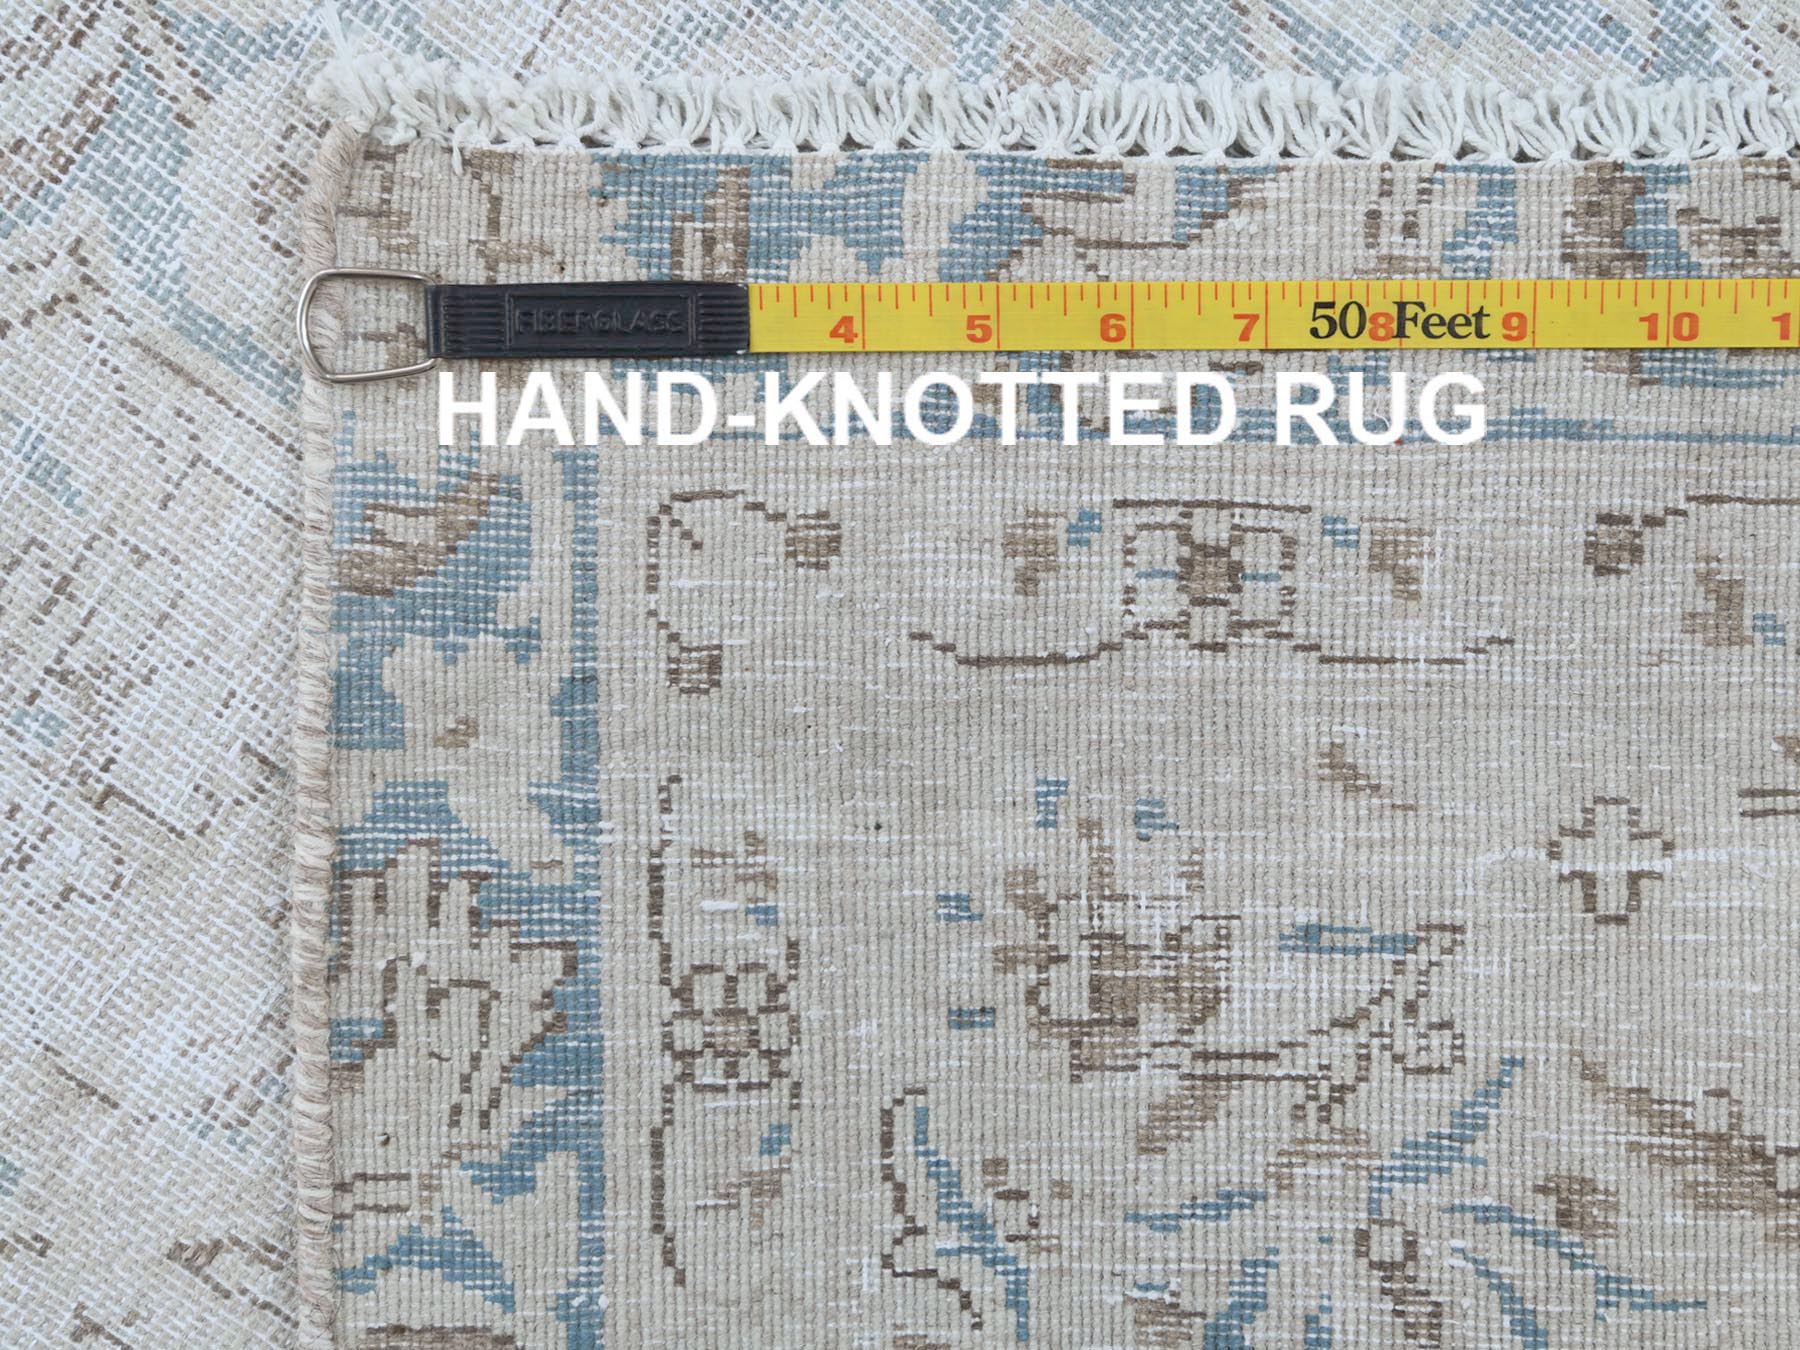 Overdyed & Vintage Rugs LUV544077